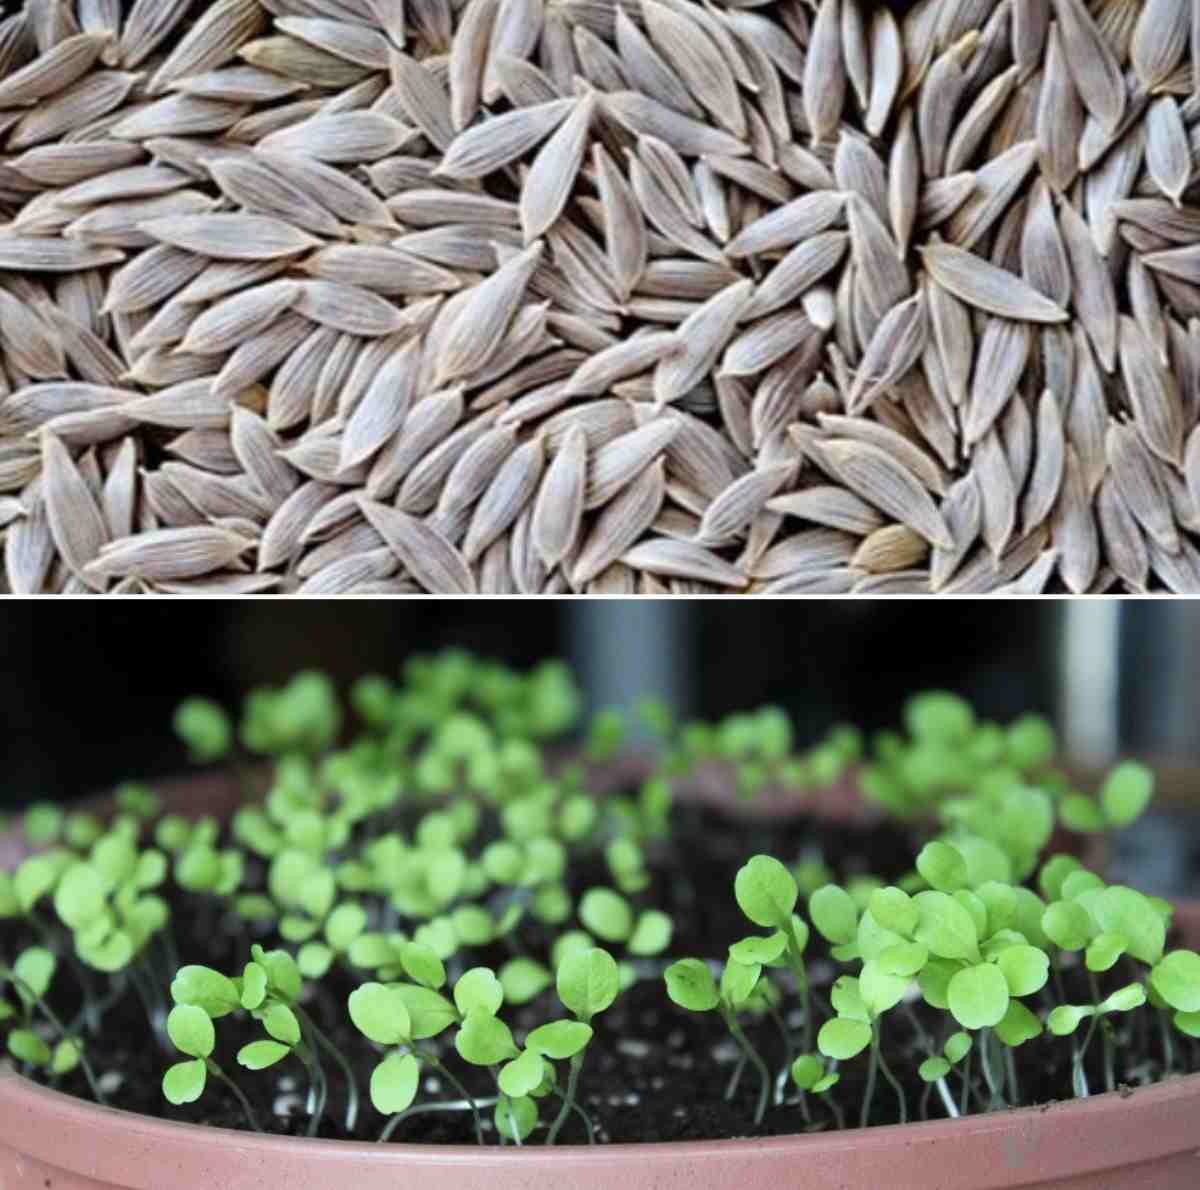 Select Lettuce seeds for germination.